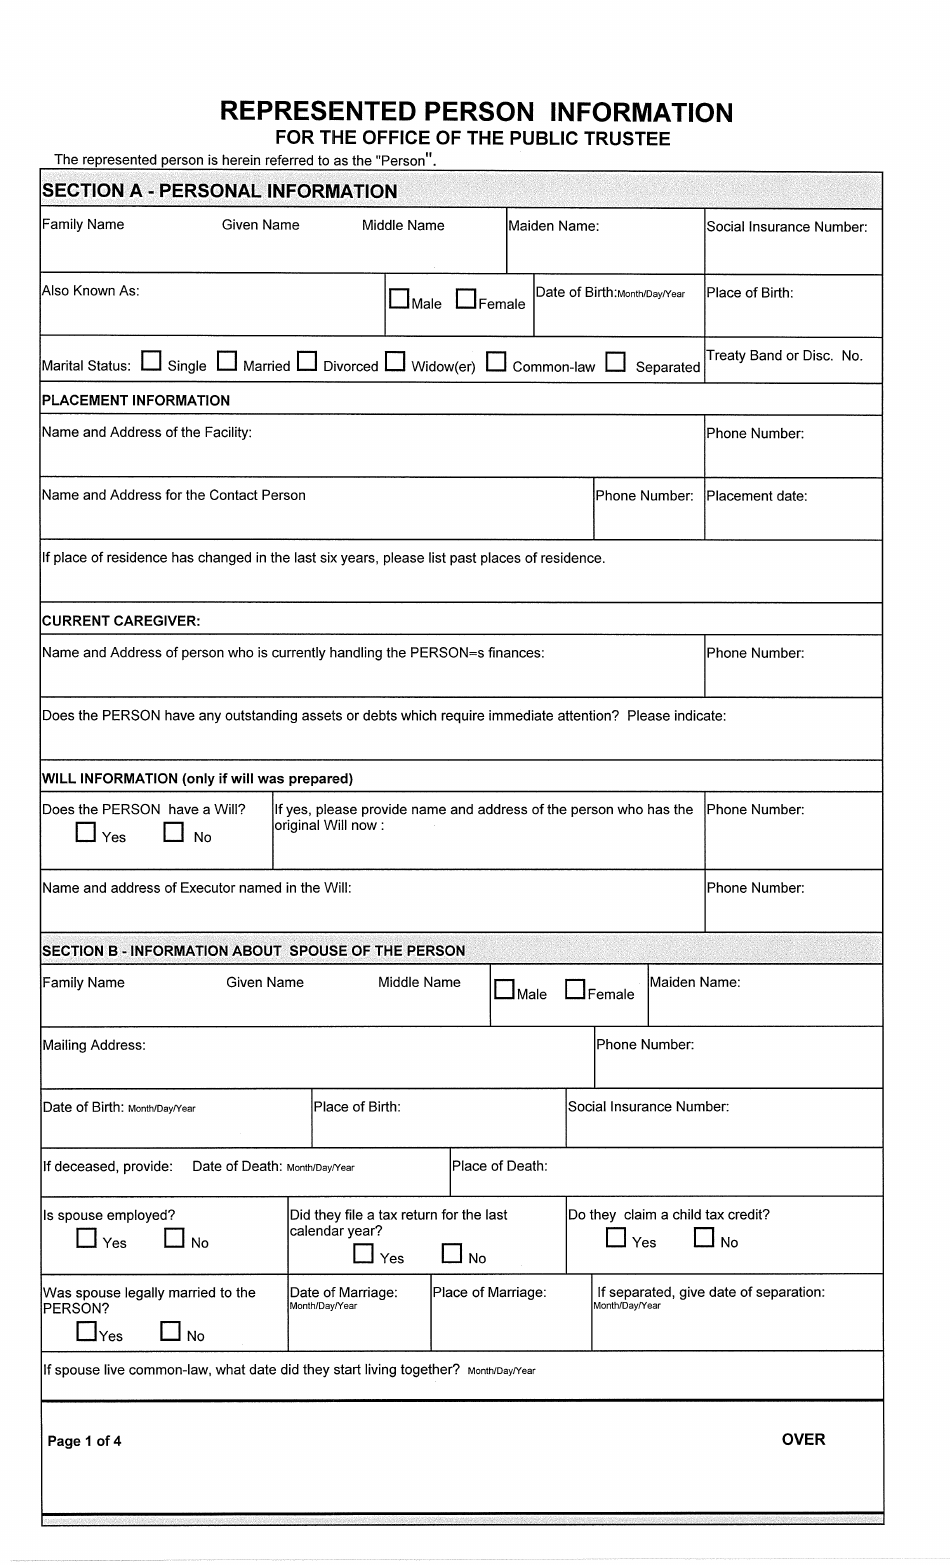 Represented Person Information Form - Northwest Territories, Canada, Page 1